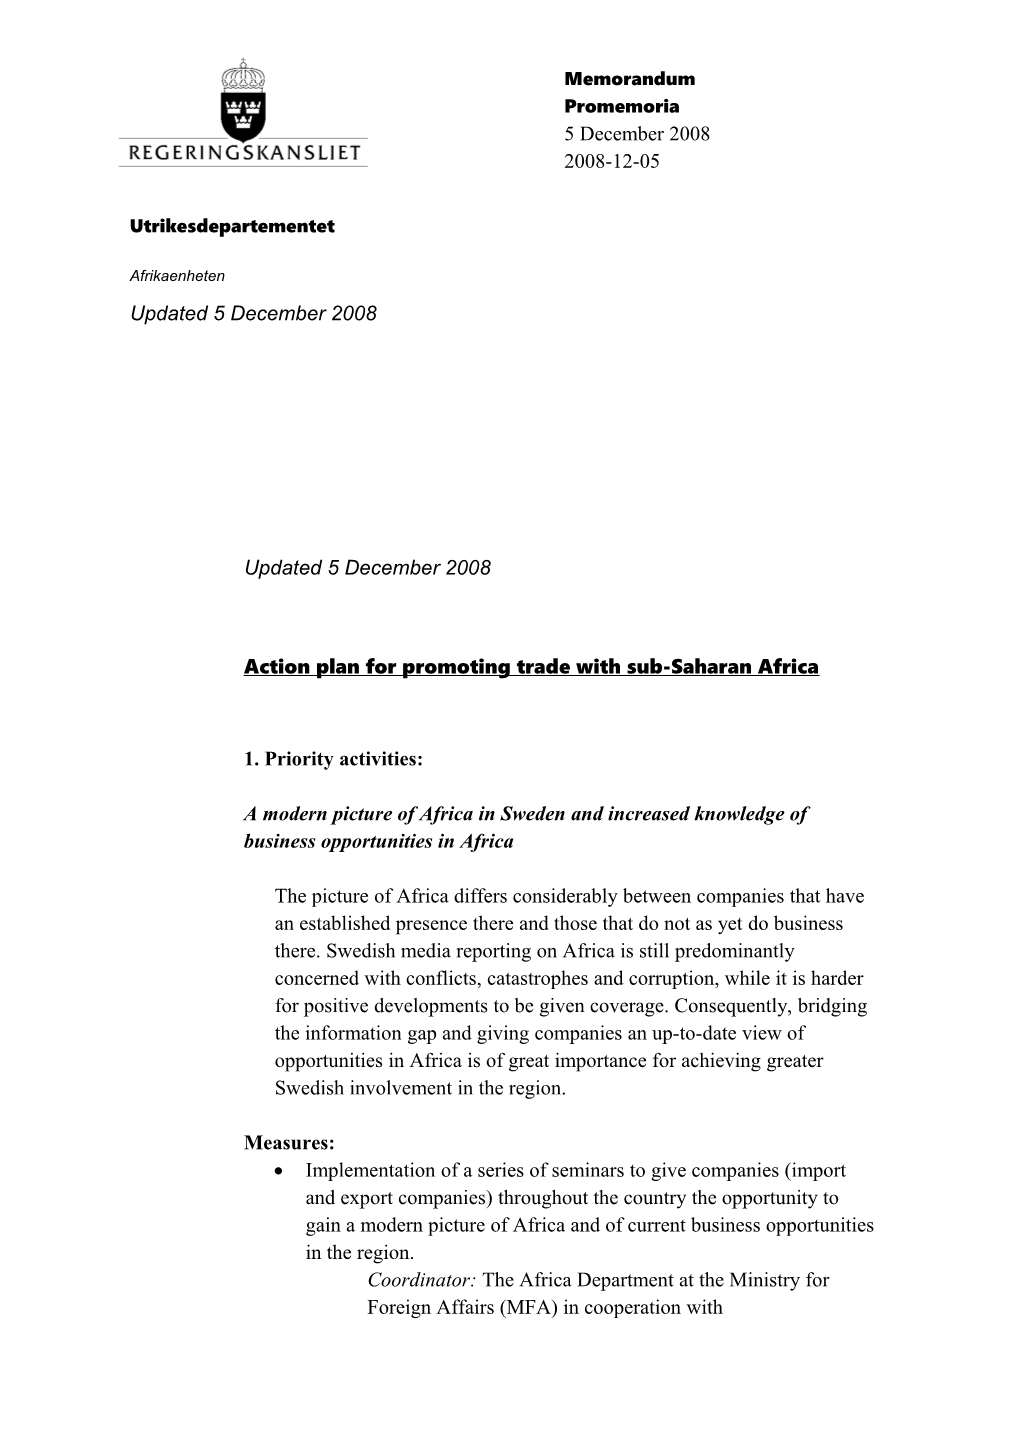 Action Plan for Promoting Trade with Sub-Saharan Africa